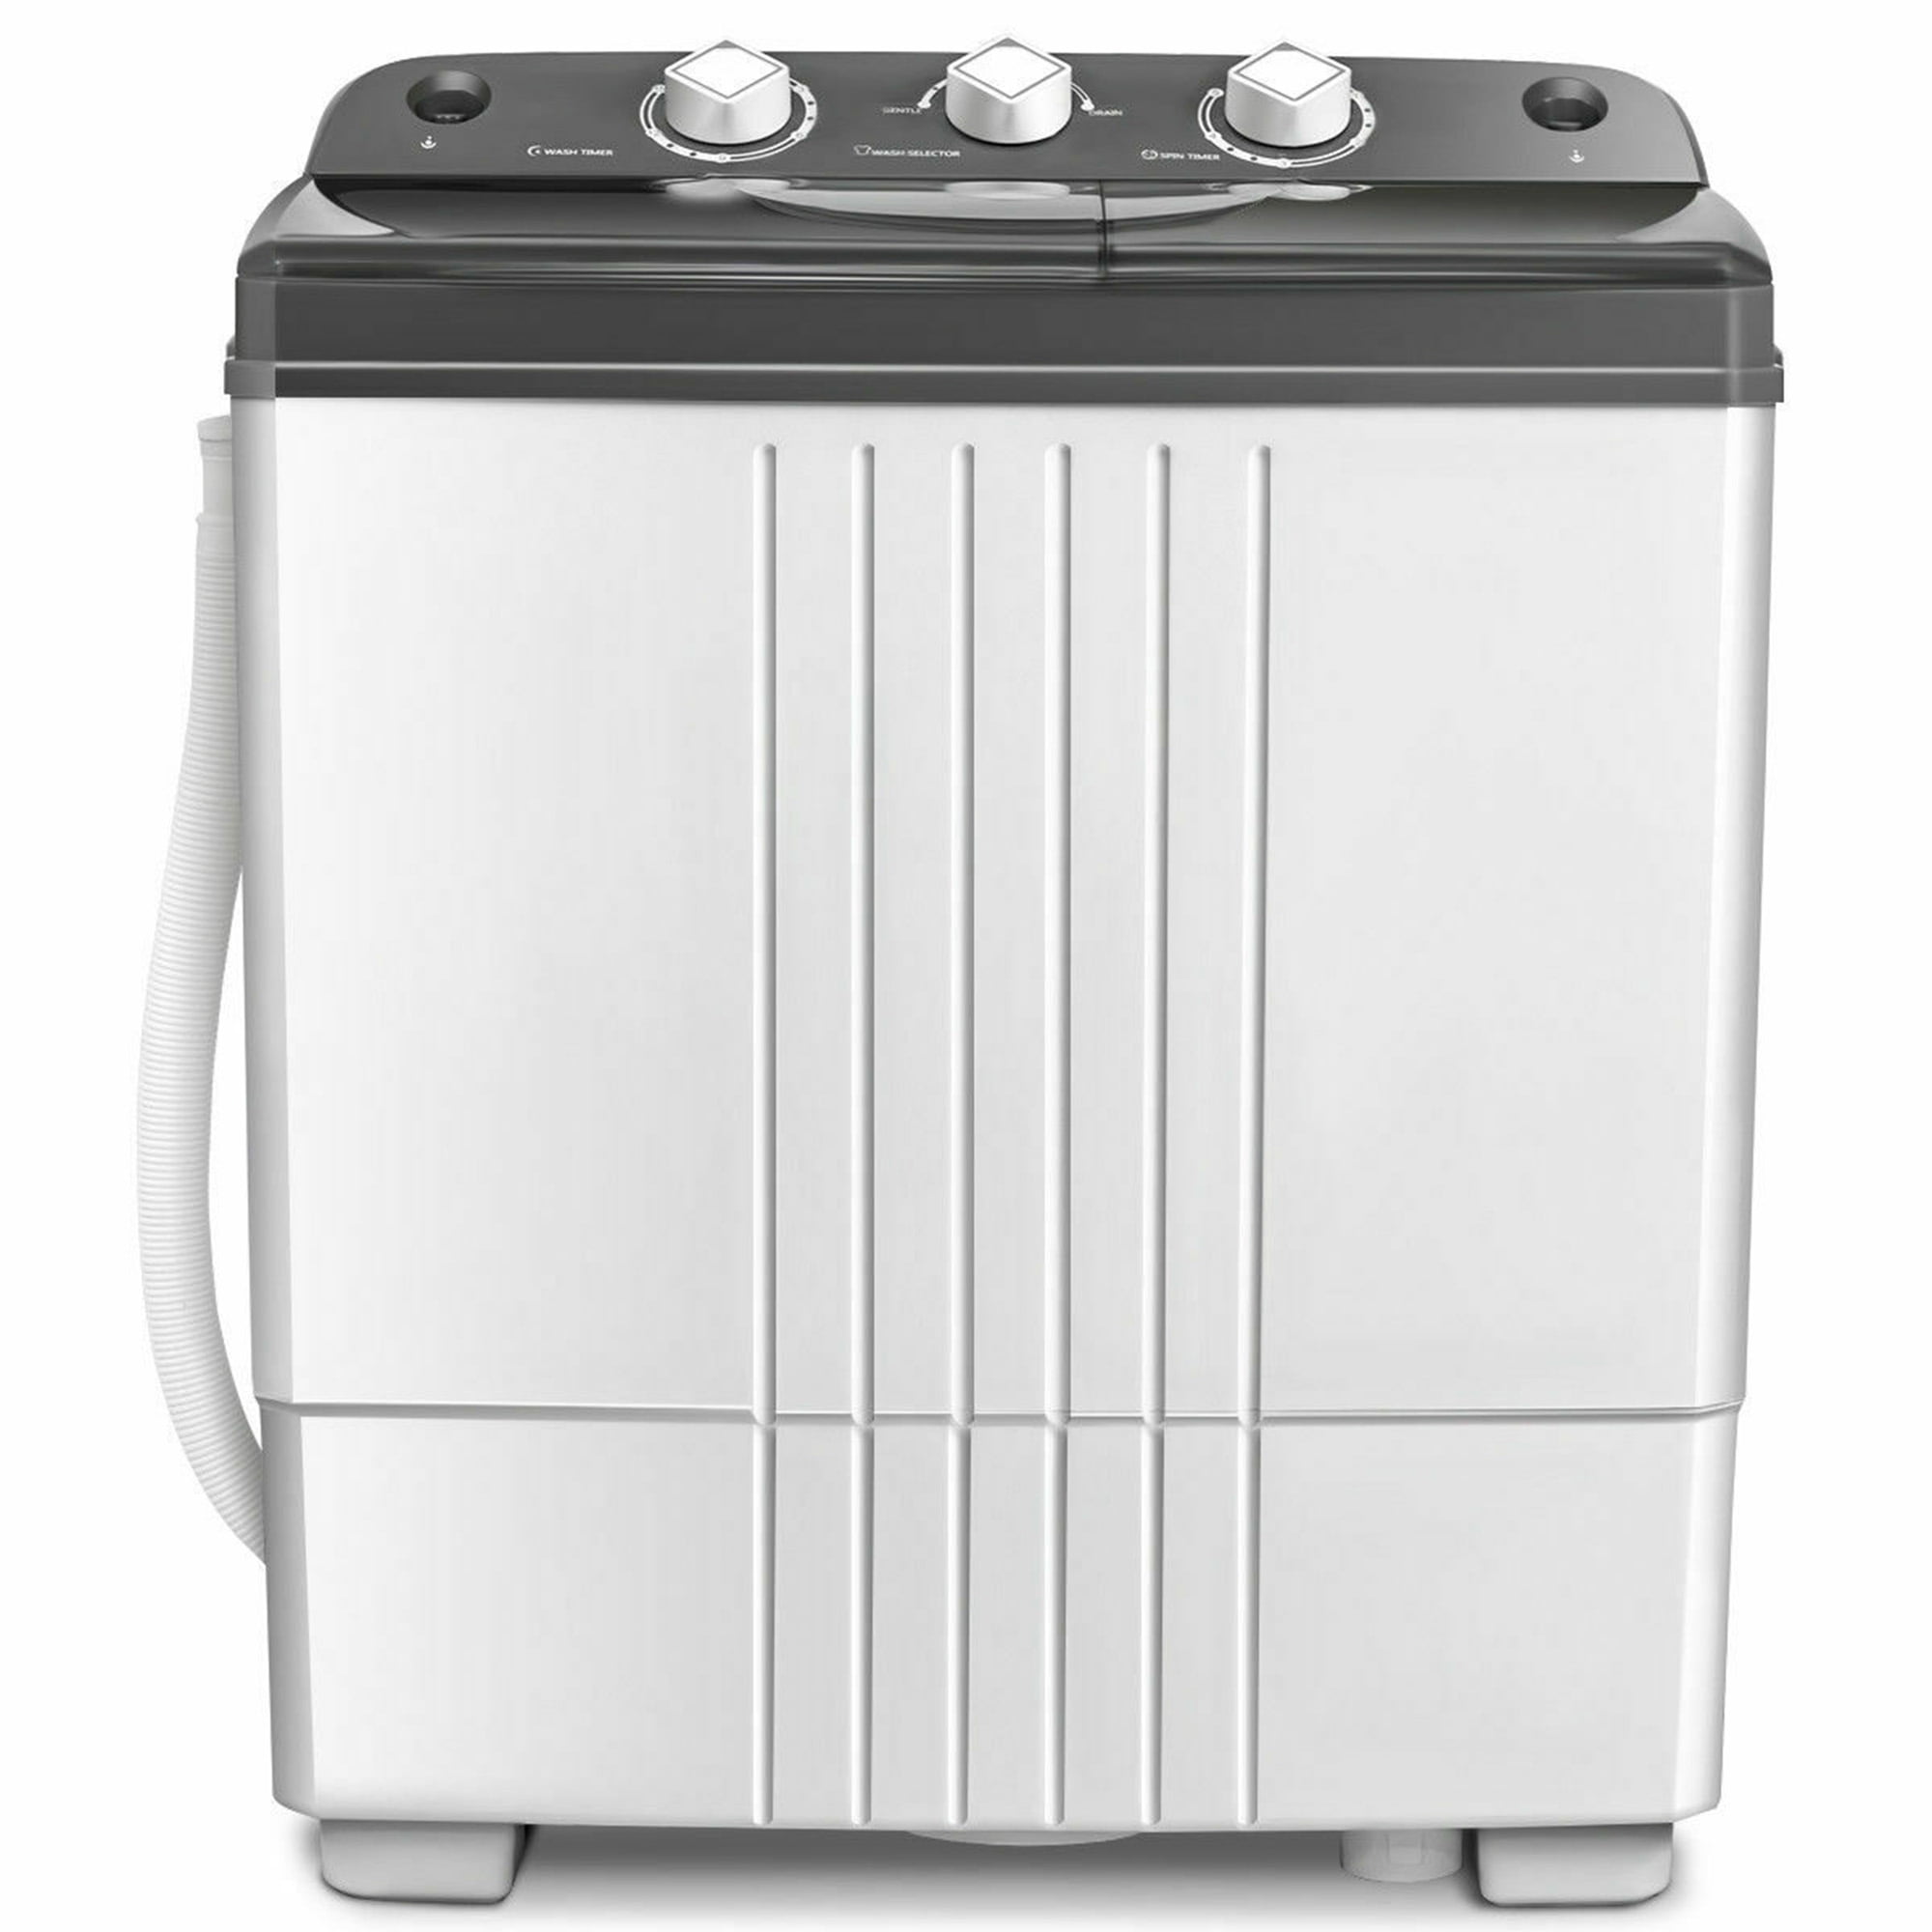  Portable Washing machine 20Lbs Capacity Mini Washer and Dryer  Combo Compact Twin Tub Laundry Washer(12Lbs) & Spinner(8Lbs) Built-in  Gravity Drain,Low Noise for Apartment,Dorms,RV Camping, GREY : Appliances